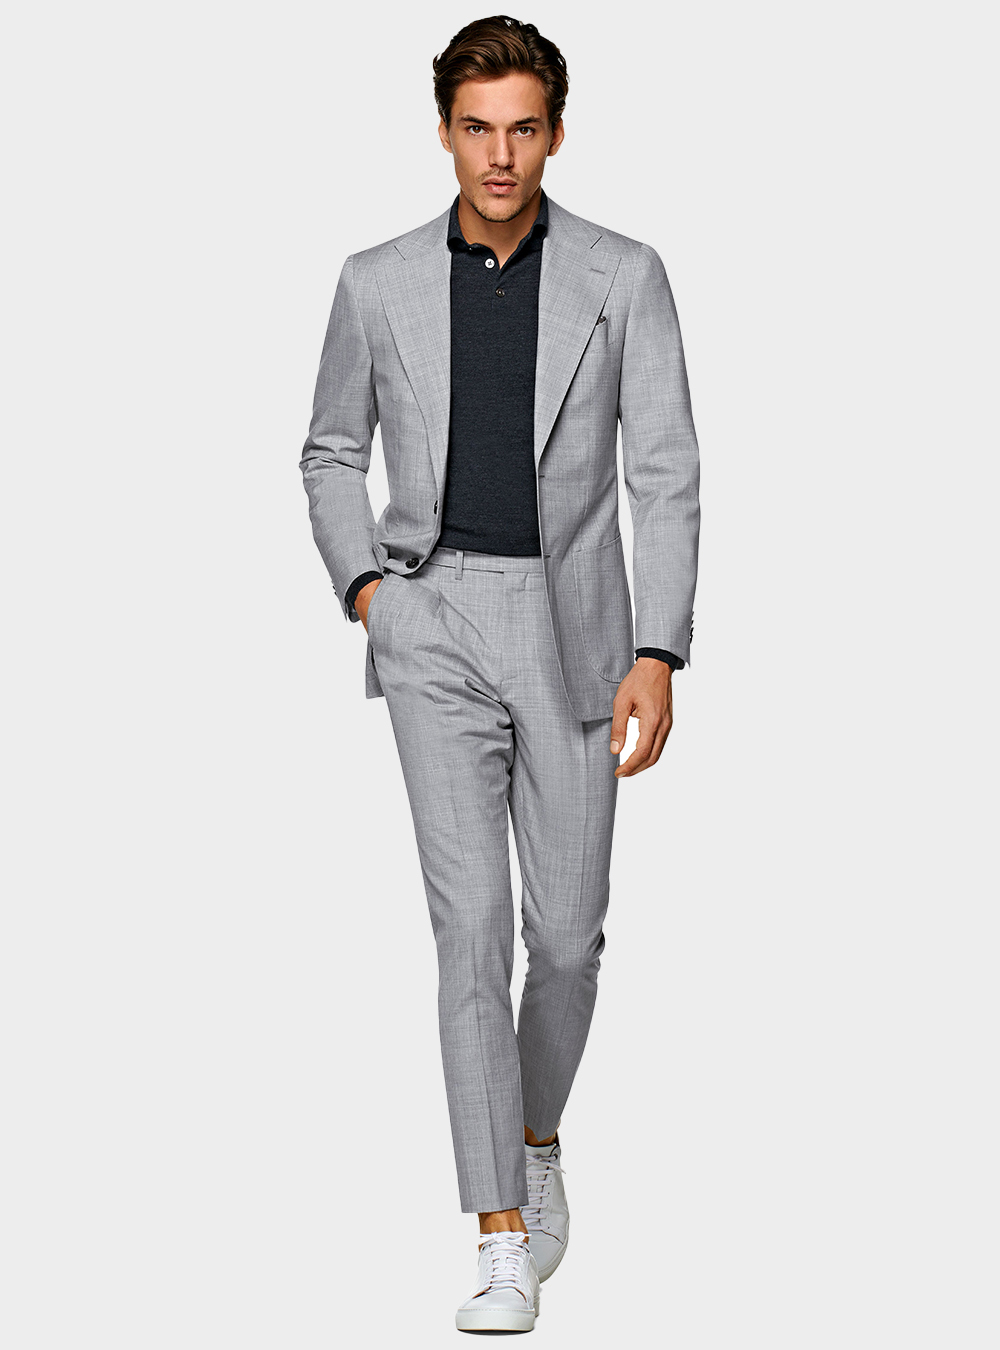 grey suit, black polo t-shirt, and white sneakers